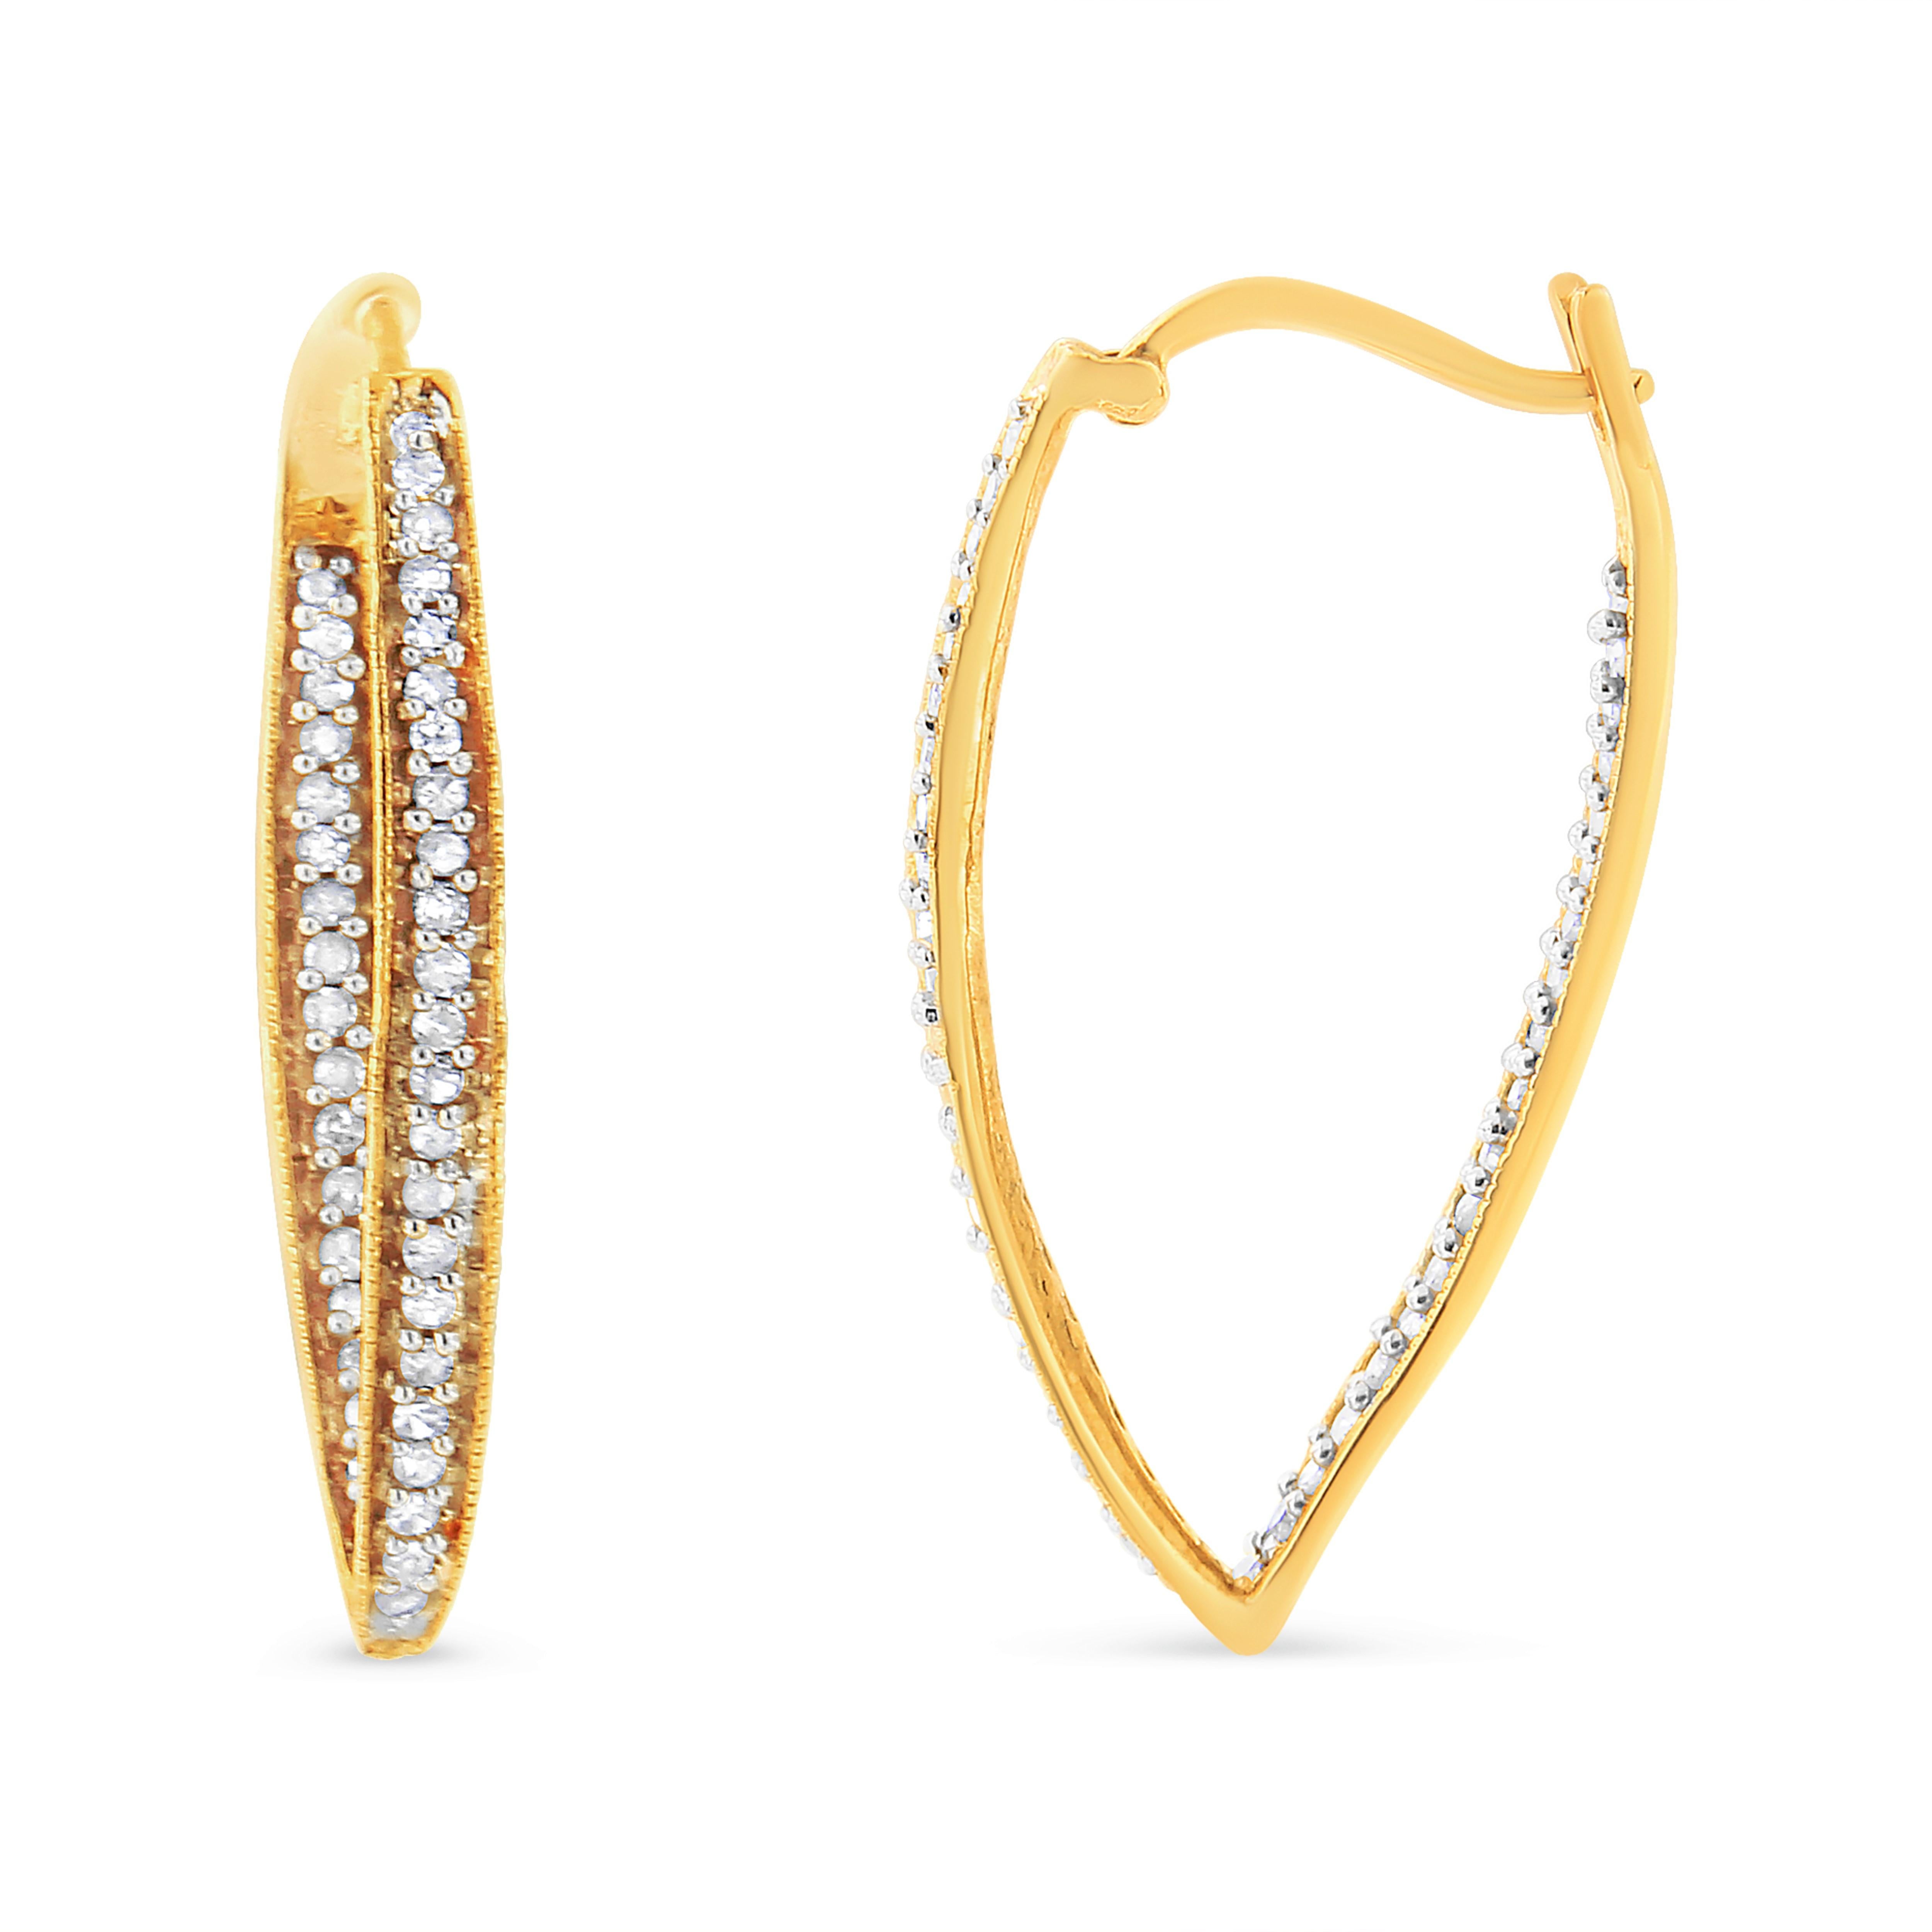 Dress up any outfit with this trendy yet timeless modern hoops. These earrings are crafted in gleaming 10k yellow gold and have an outside-inside design embellished with beautiful, natural diamonds. The diamonds are round-cut and sparkle in an